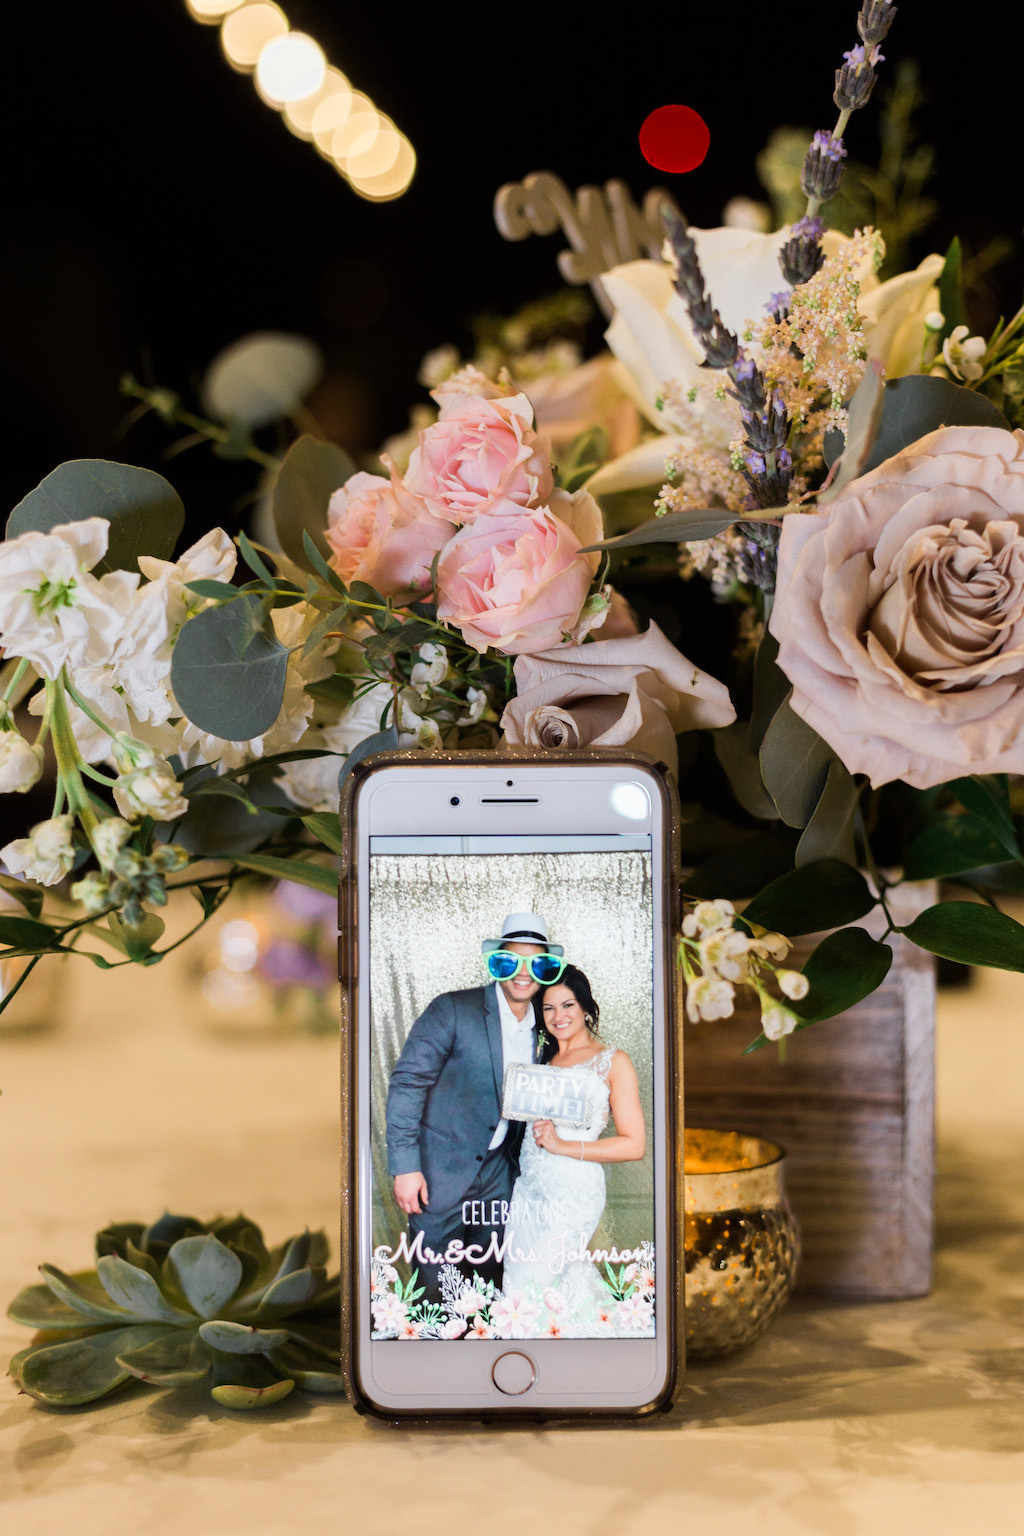 iPhone Photo of Bride and Groom Photo Booth Wedding Picture, Wooden Planter Box with Lilac, Blush Pink, Ivory and Greenery Floral Centerpiece